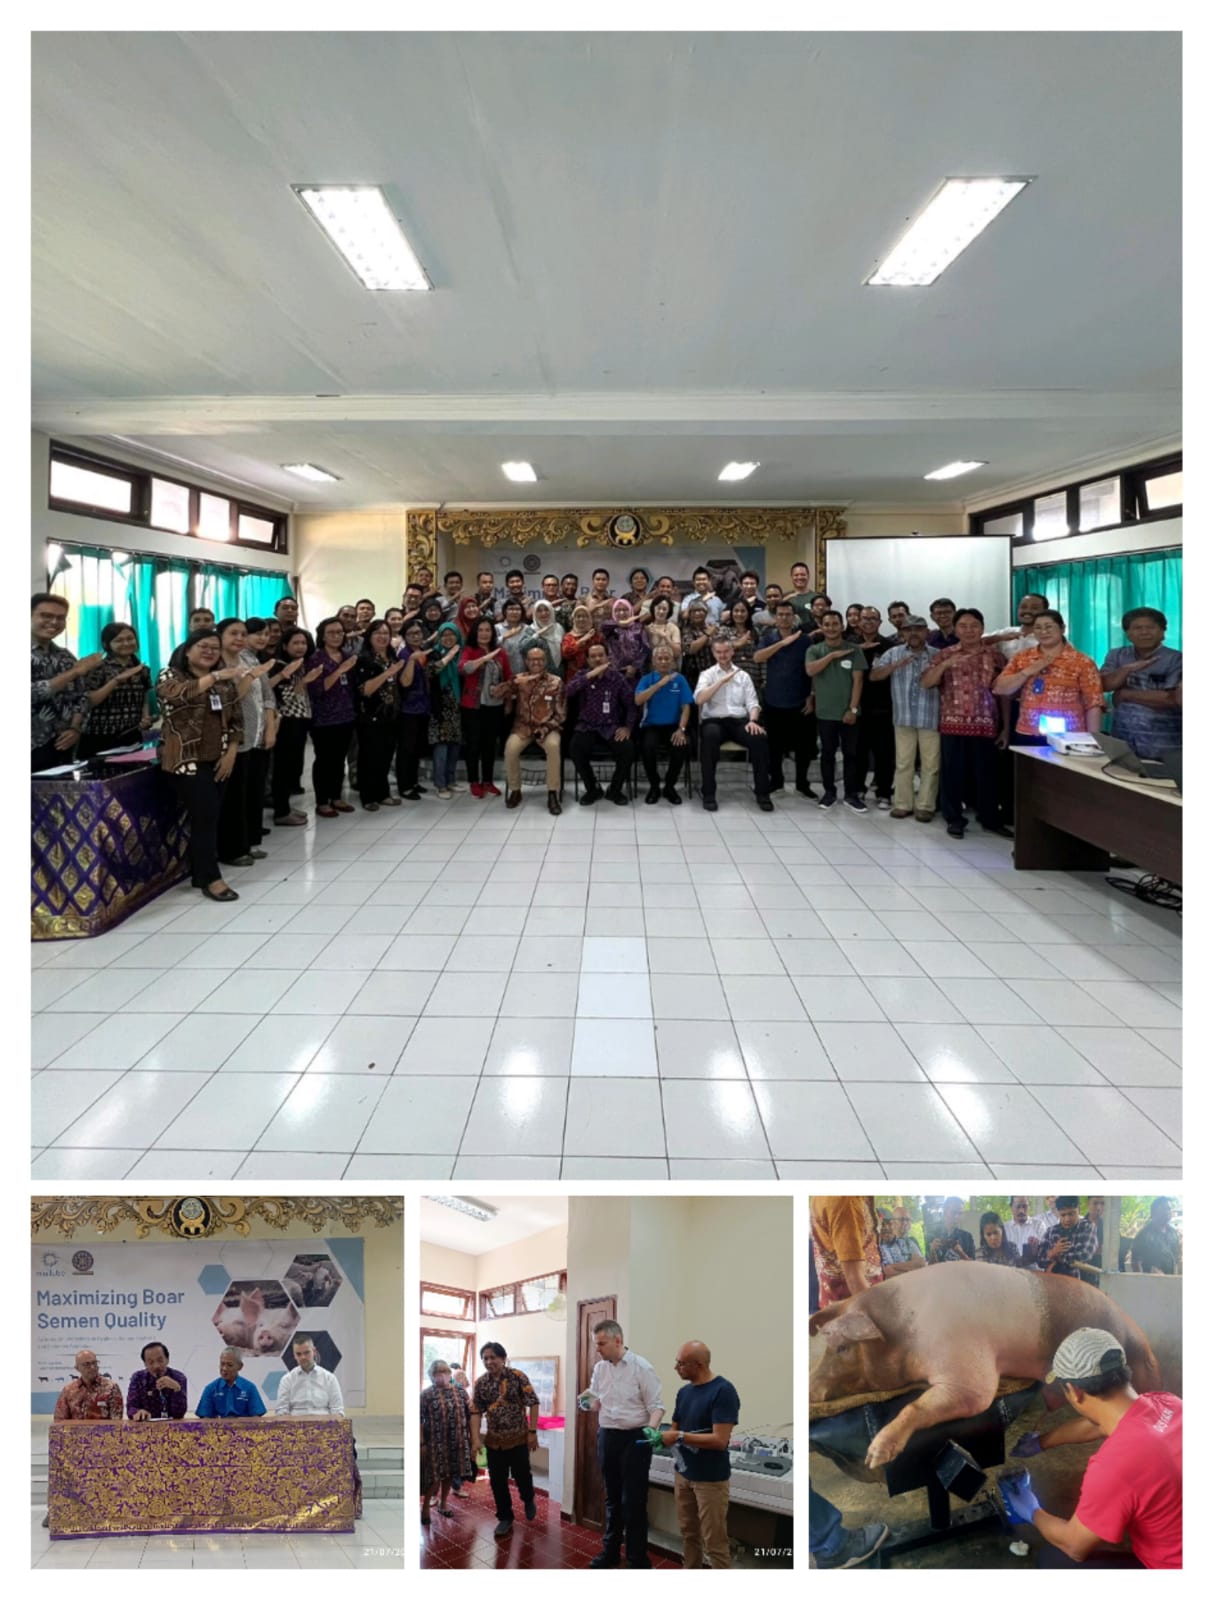 Fapet Udayana University and MINITUBE Collaborate to Hold a Workshop on Maximizing Boar Cement Quality